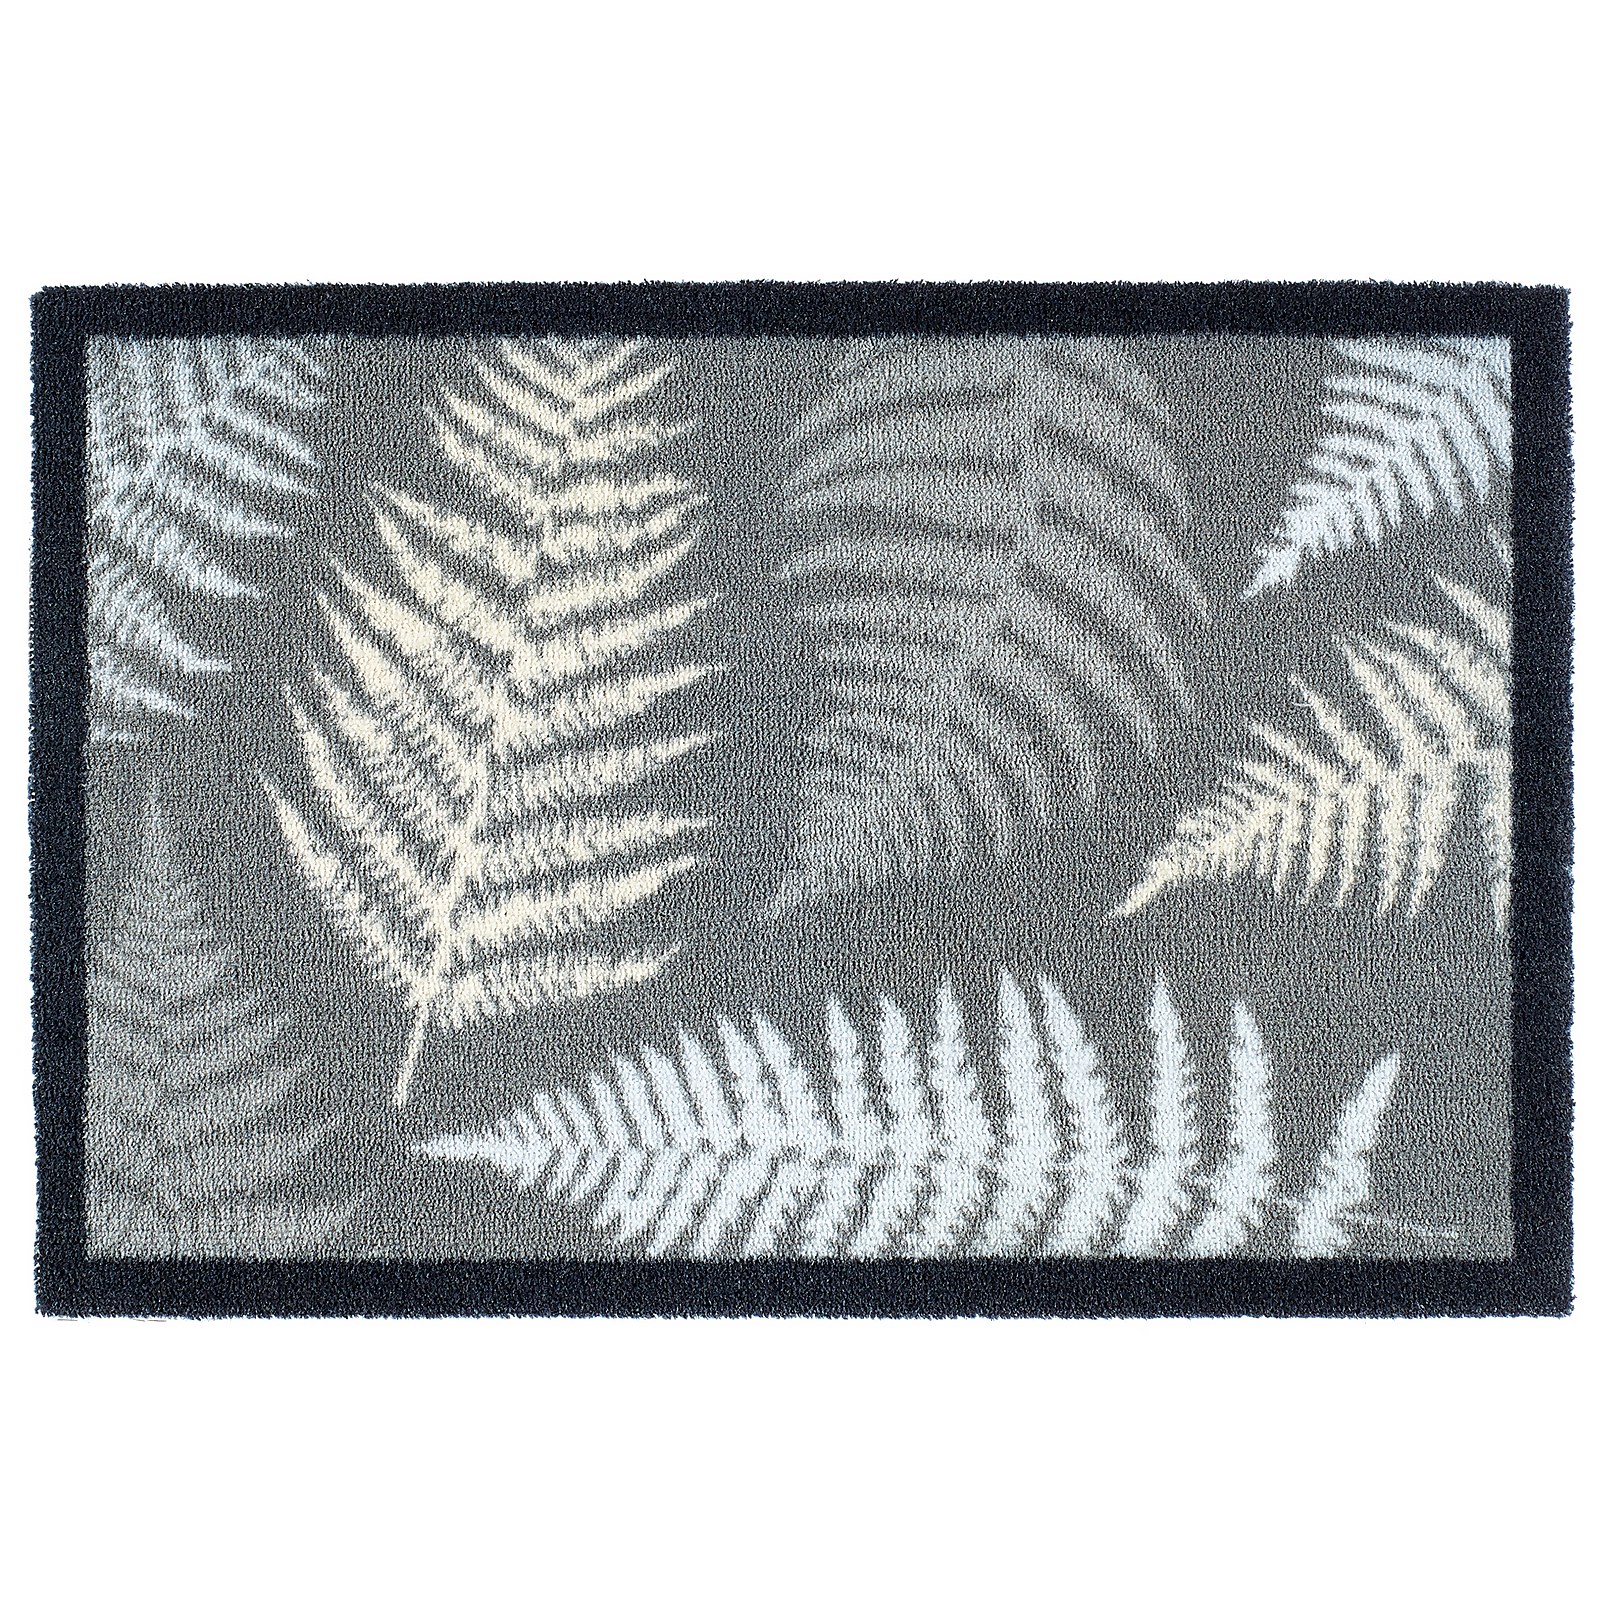 Photo of Muddle Mat My Leaves - 50x75cm